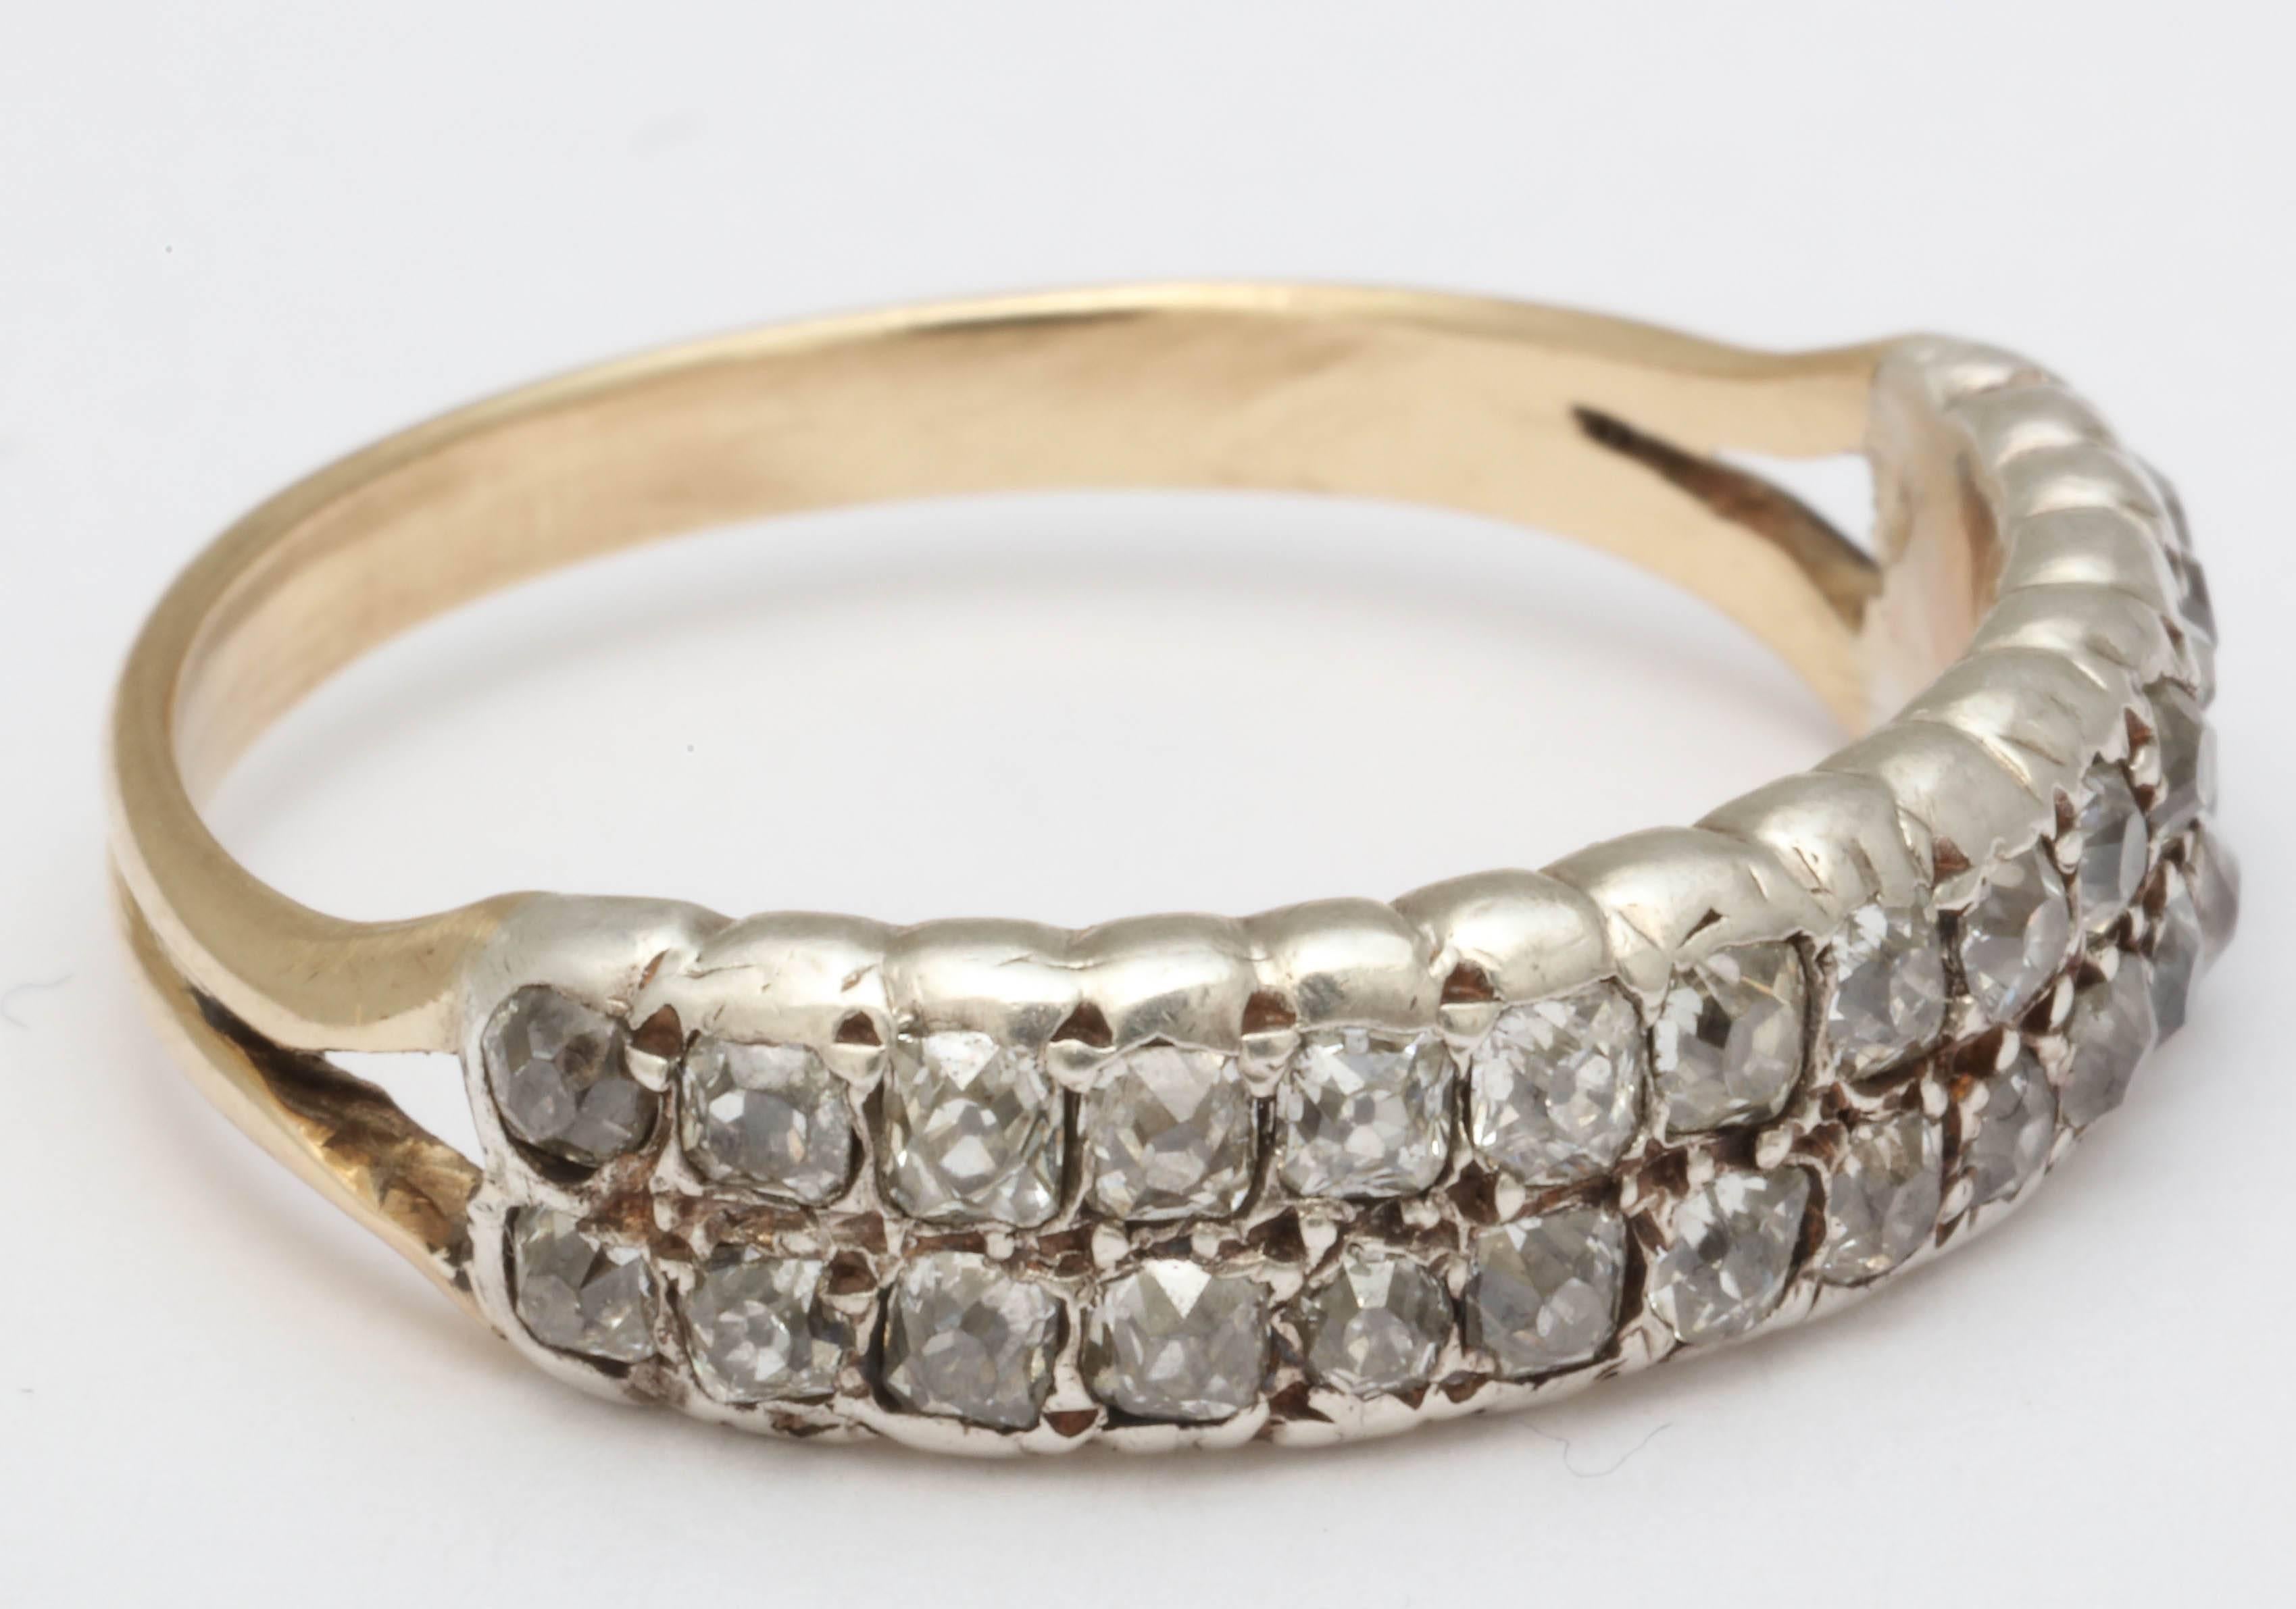 Double row diamond band made c.1800. This Georgian stunner has 30 diamonds weighing approximately .03-.05cts each totalling just under .75ctw. The ring is silver on gold and has a closed back setting all indicative of this period. 